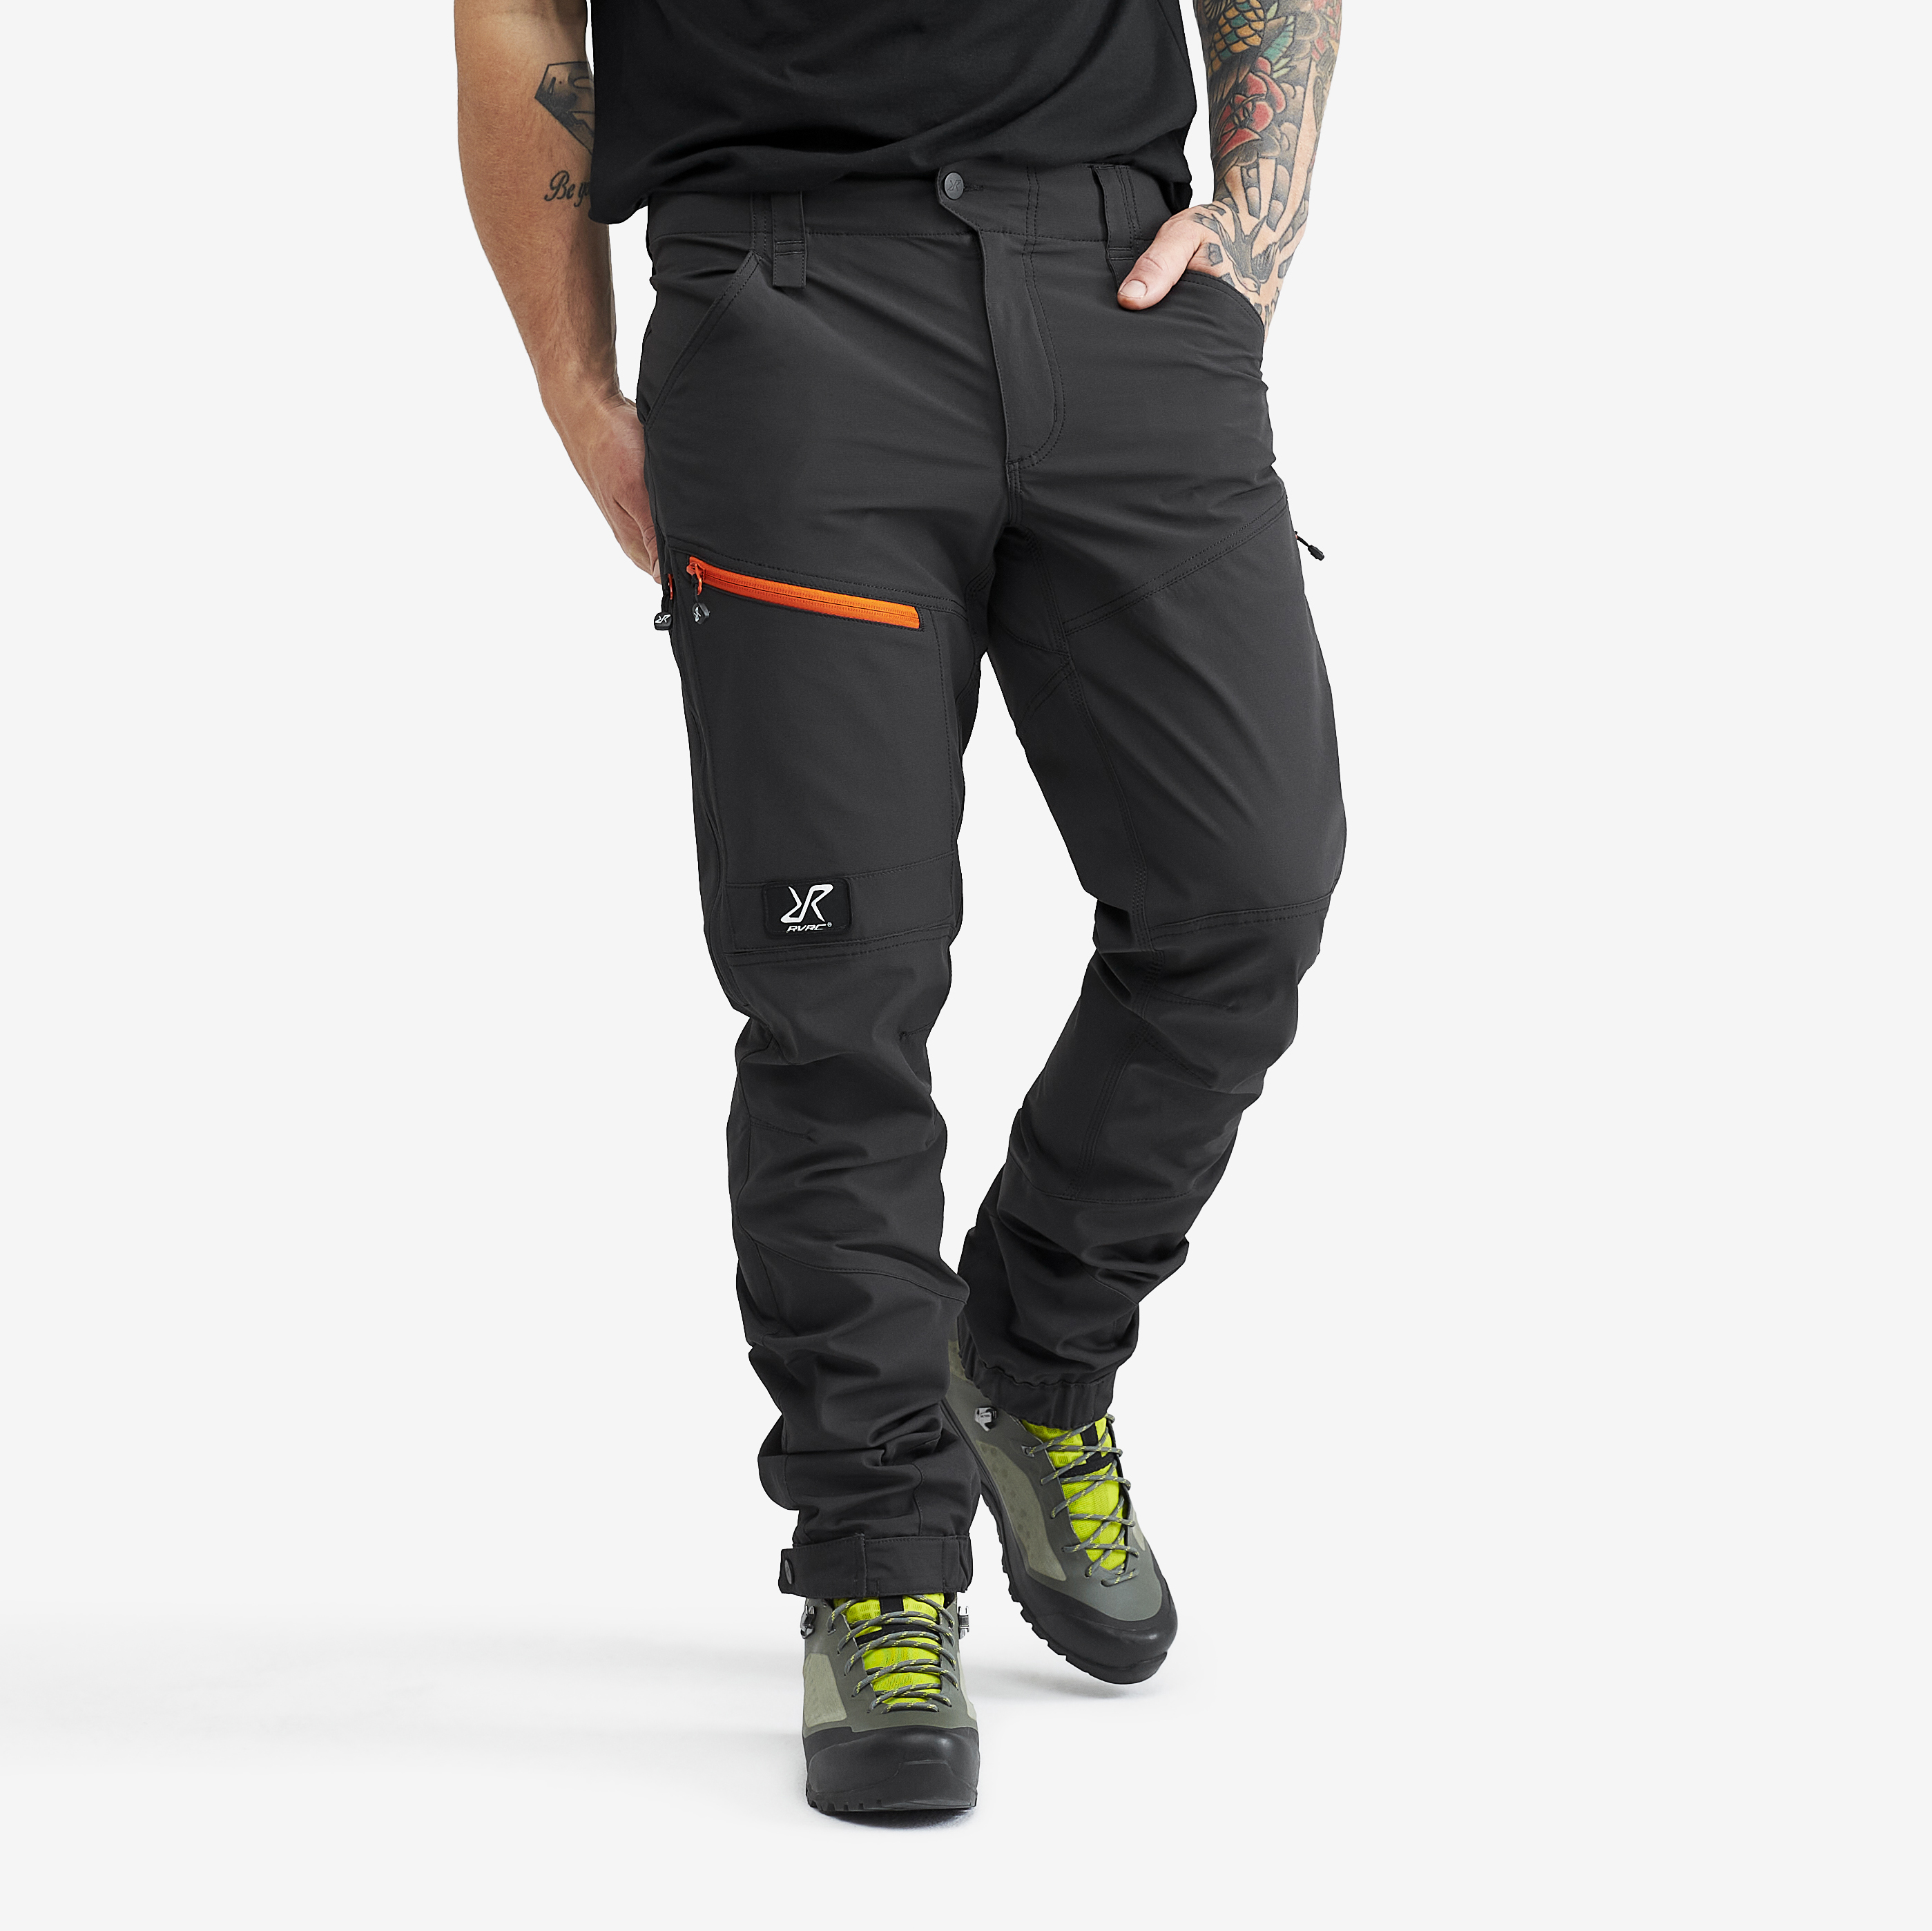 Silence Pants Anthracite Men